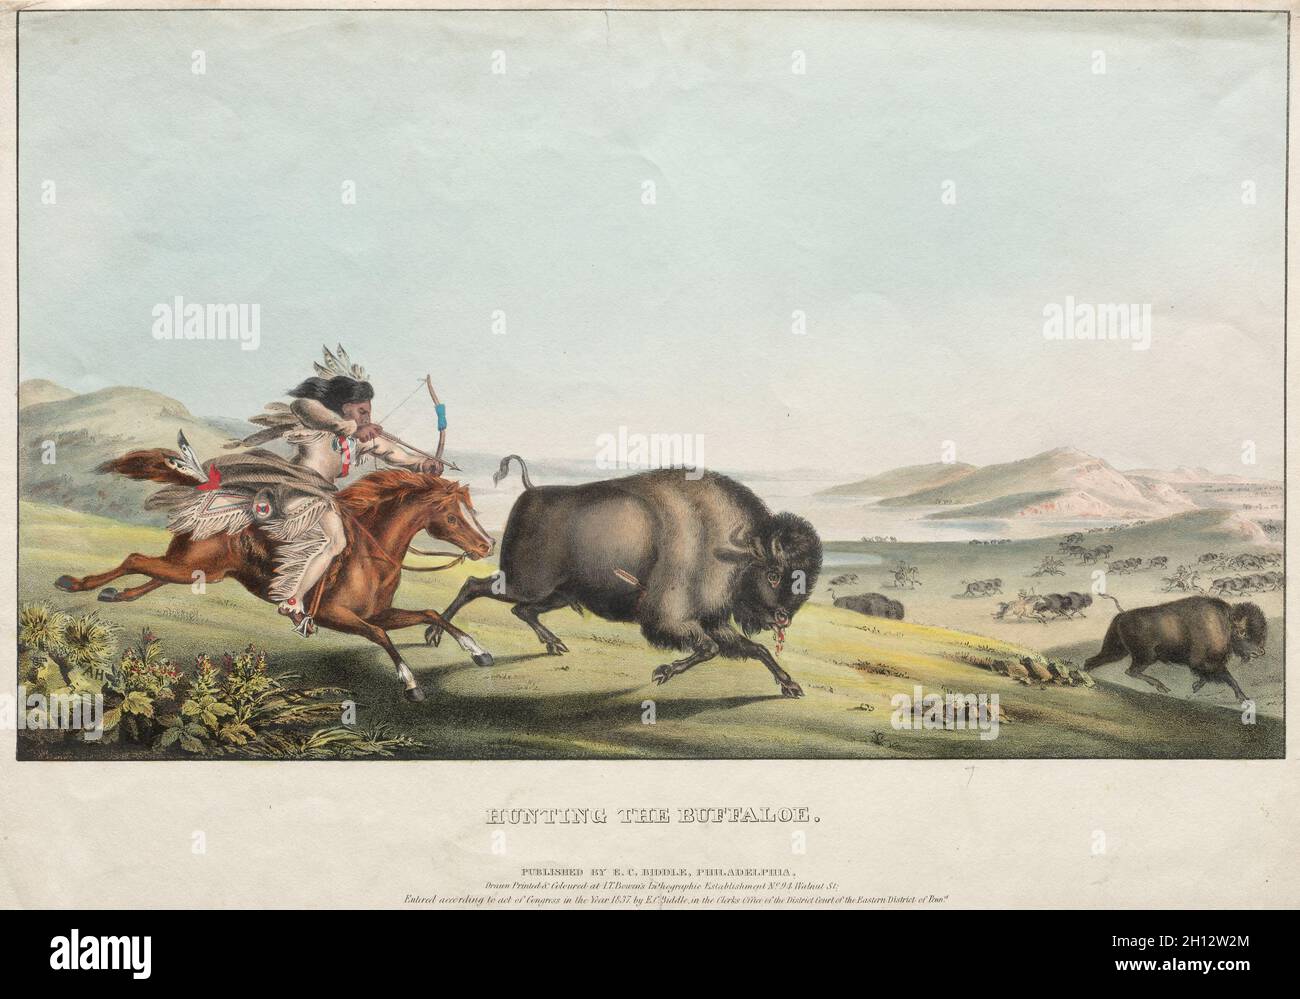 Hunting the Buffalo, 1837. E. C. Biddle (American), John T. Bowen (British, c. 1801-1856), after Peter Rindisbacher (Swiss), E.C. Biddle. Lithograph, hand colored; Stock Photo